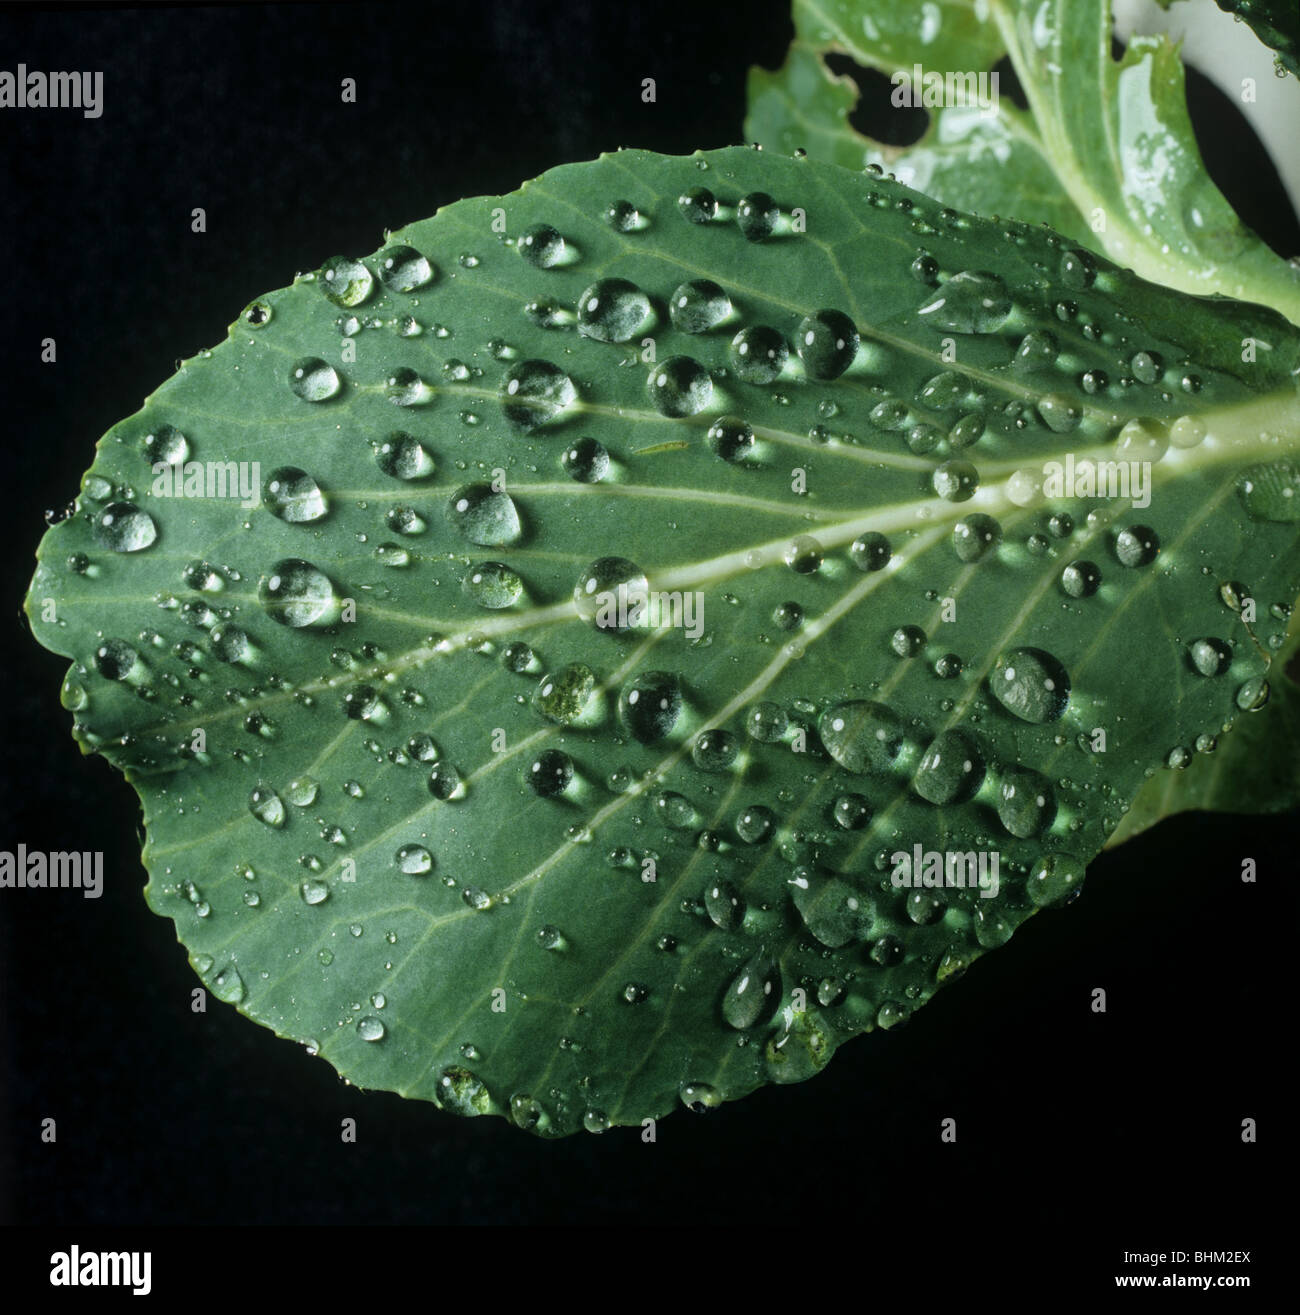 High contact angle of water droplets on the repellant surface of a cabbage leaf Stock Photo